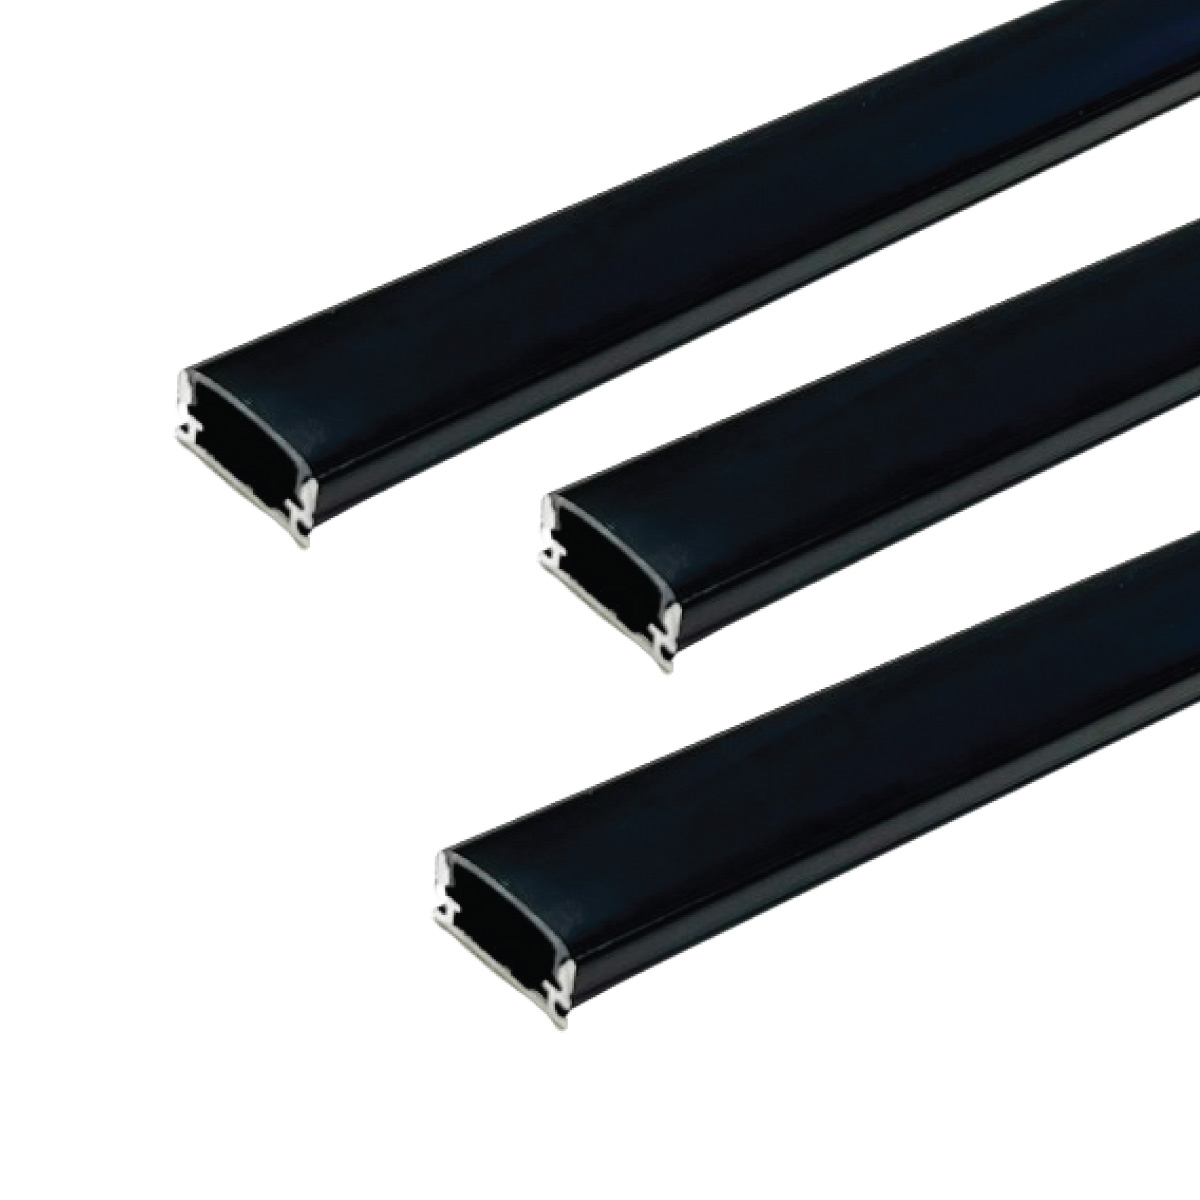 View Pack of 3 Surface Mounted Black Aluminium Profiles 2M information